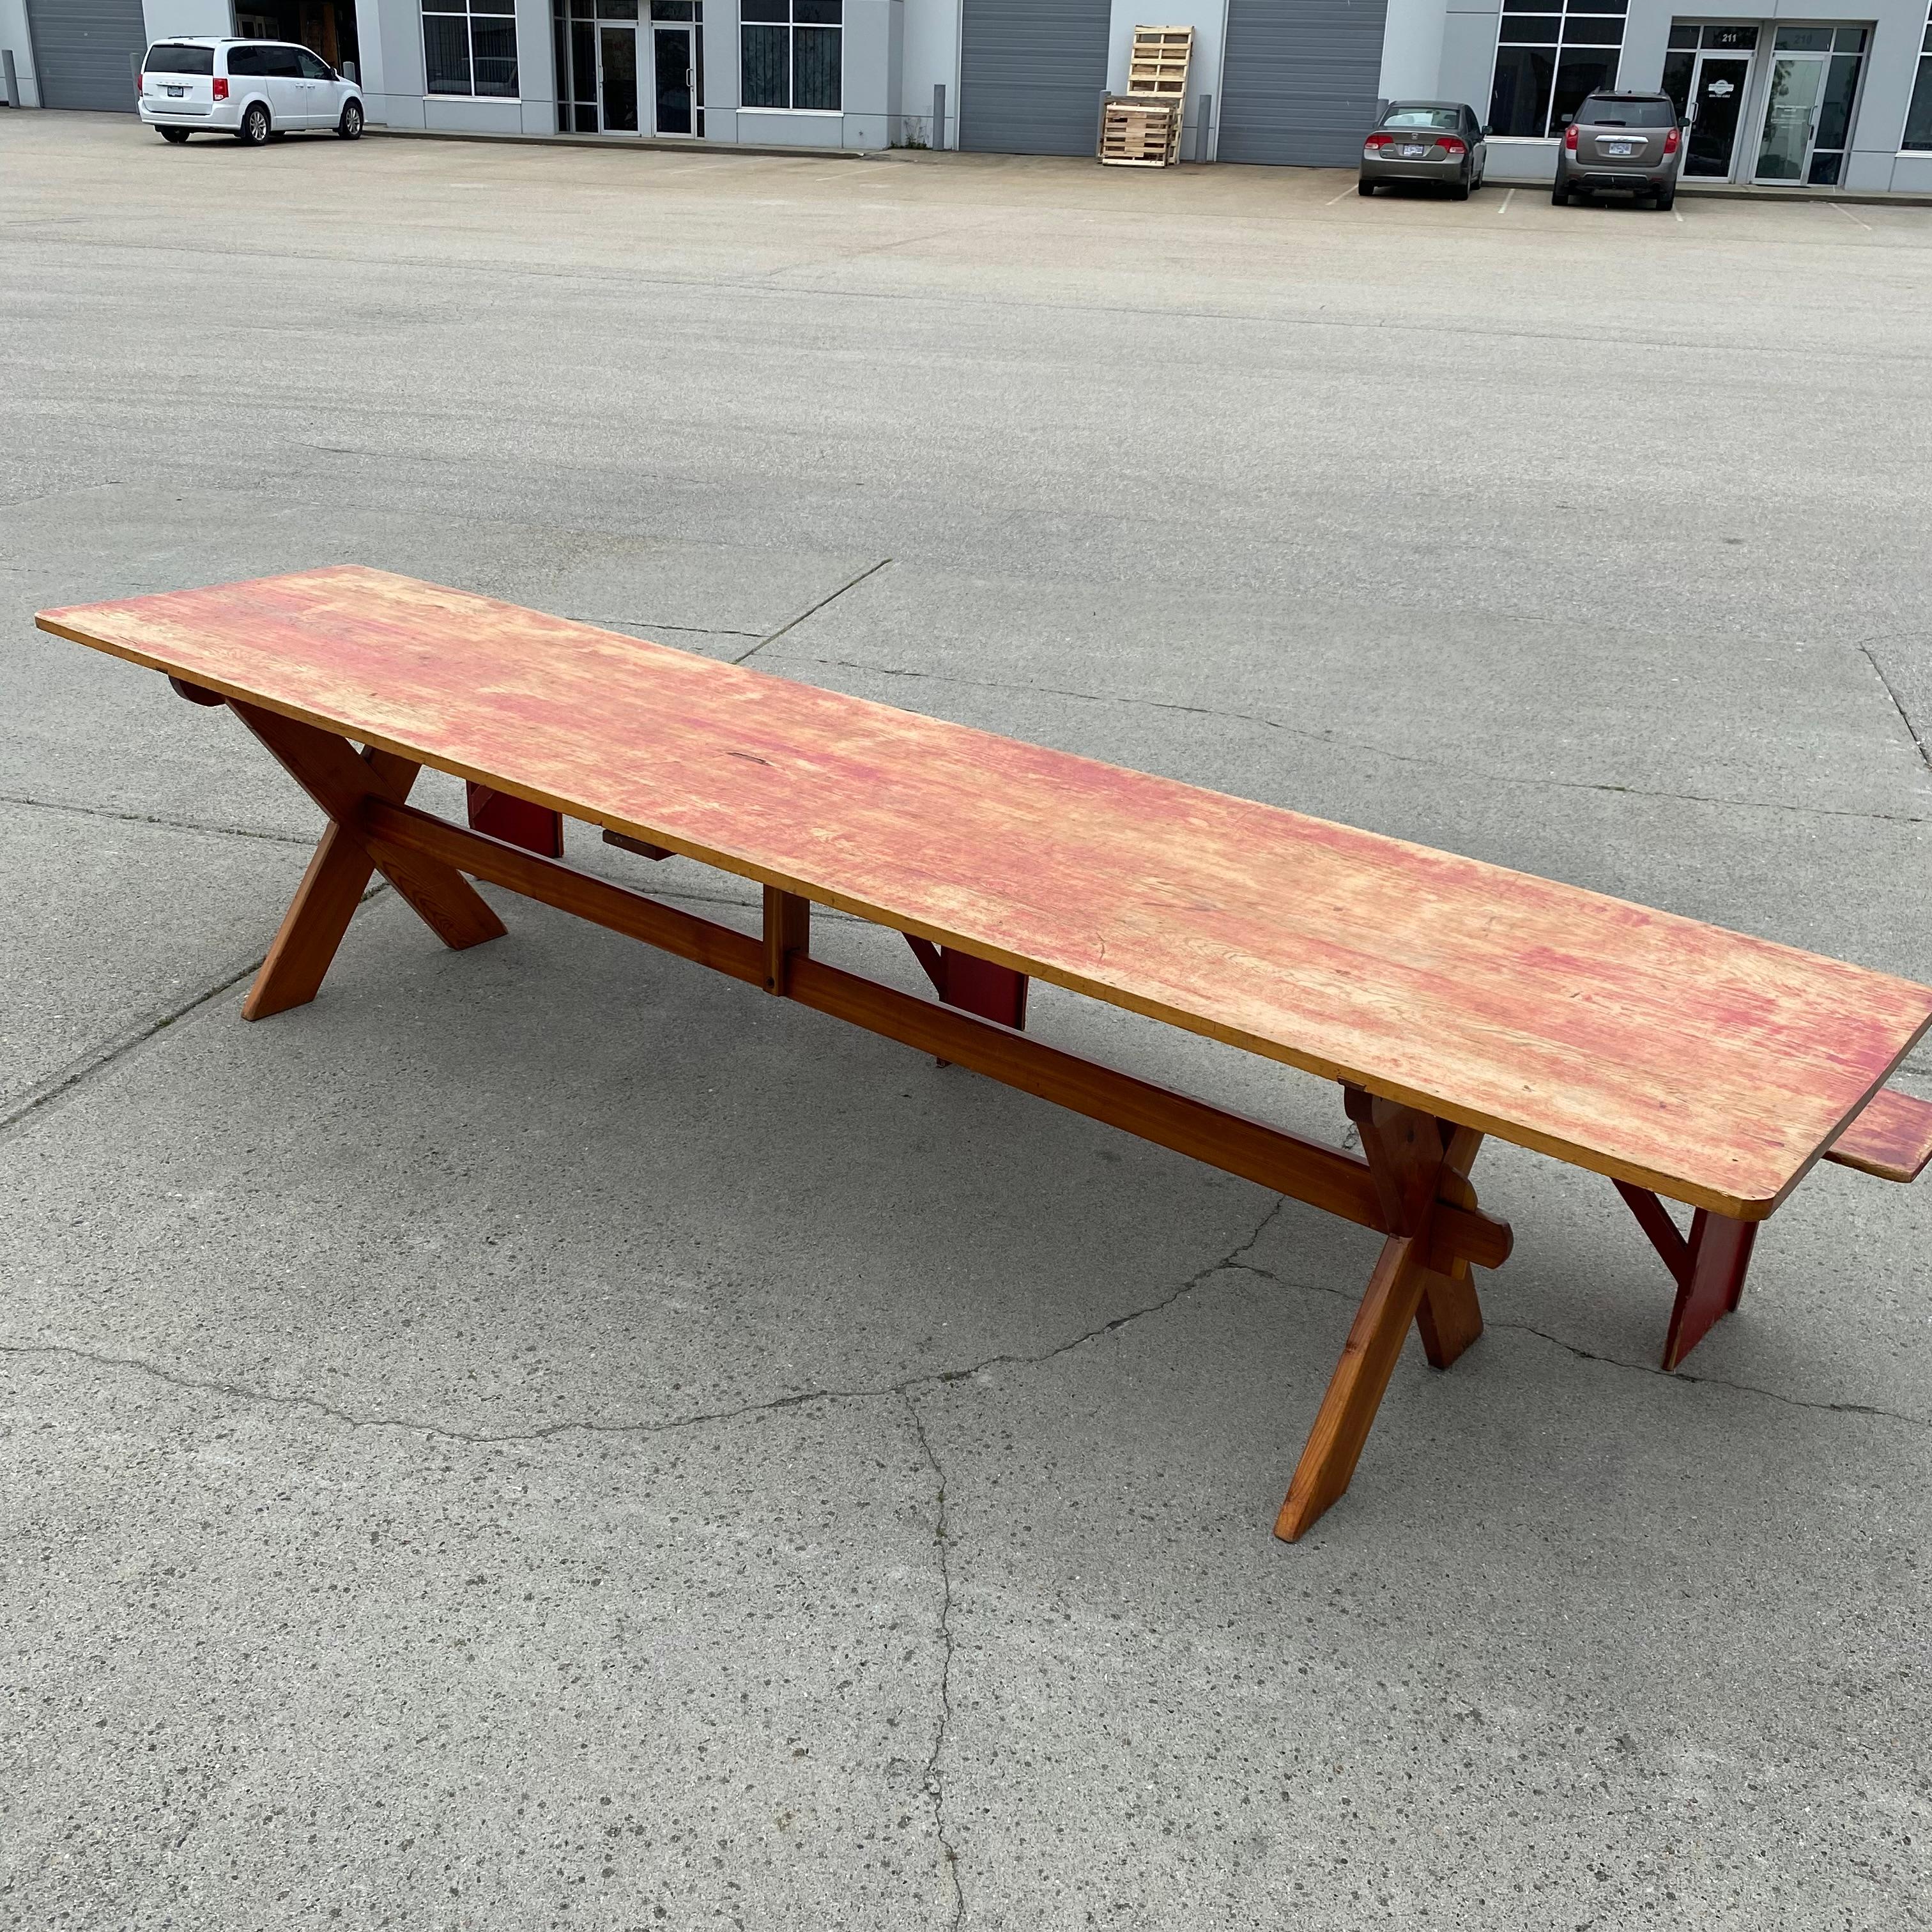 Iconic Canadian prairie saw buck table in pine retaining red original  paint on a two board plank top in classic country style base.. These long tables were documented by Canadian researchers as Hutterite made and presumed usage was large harvest